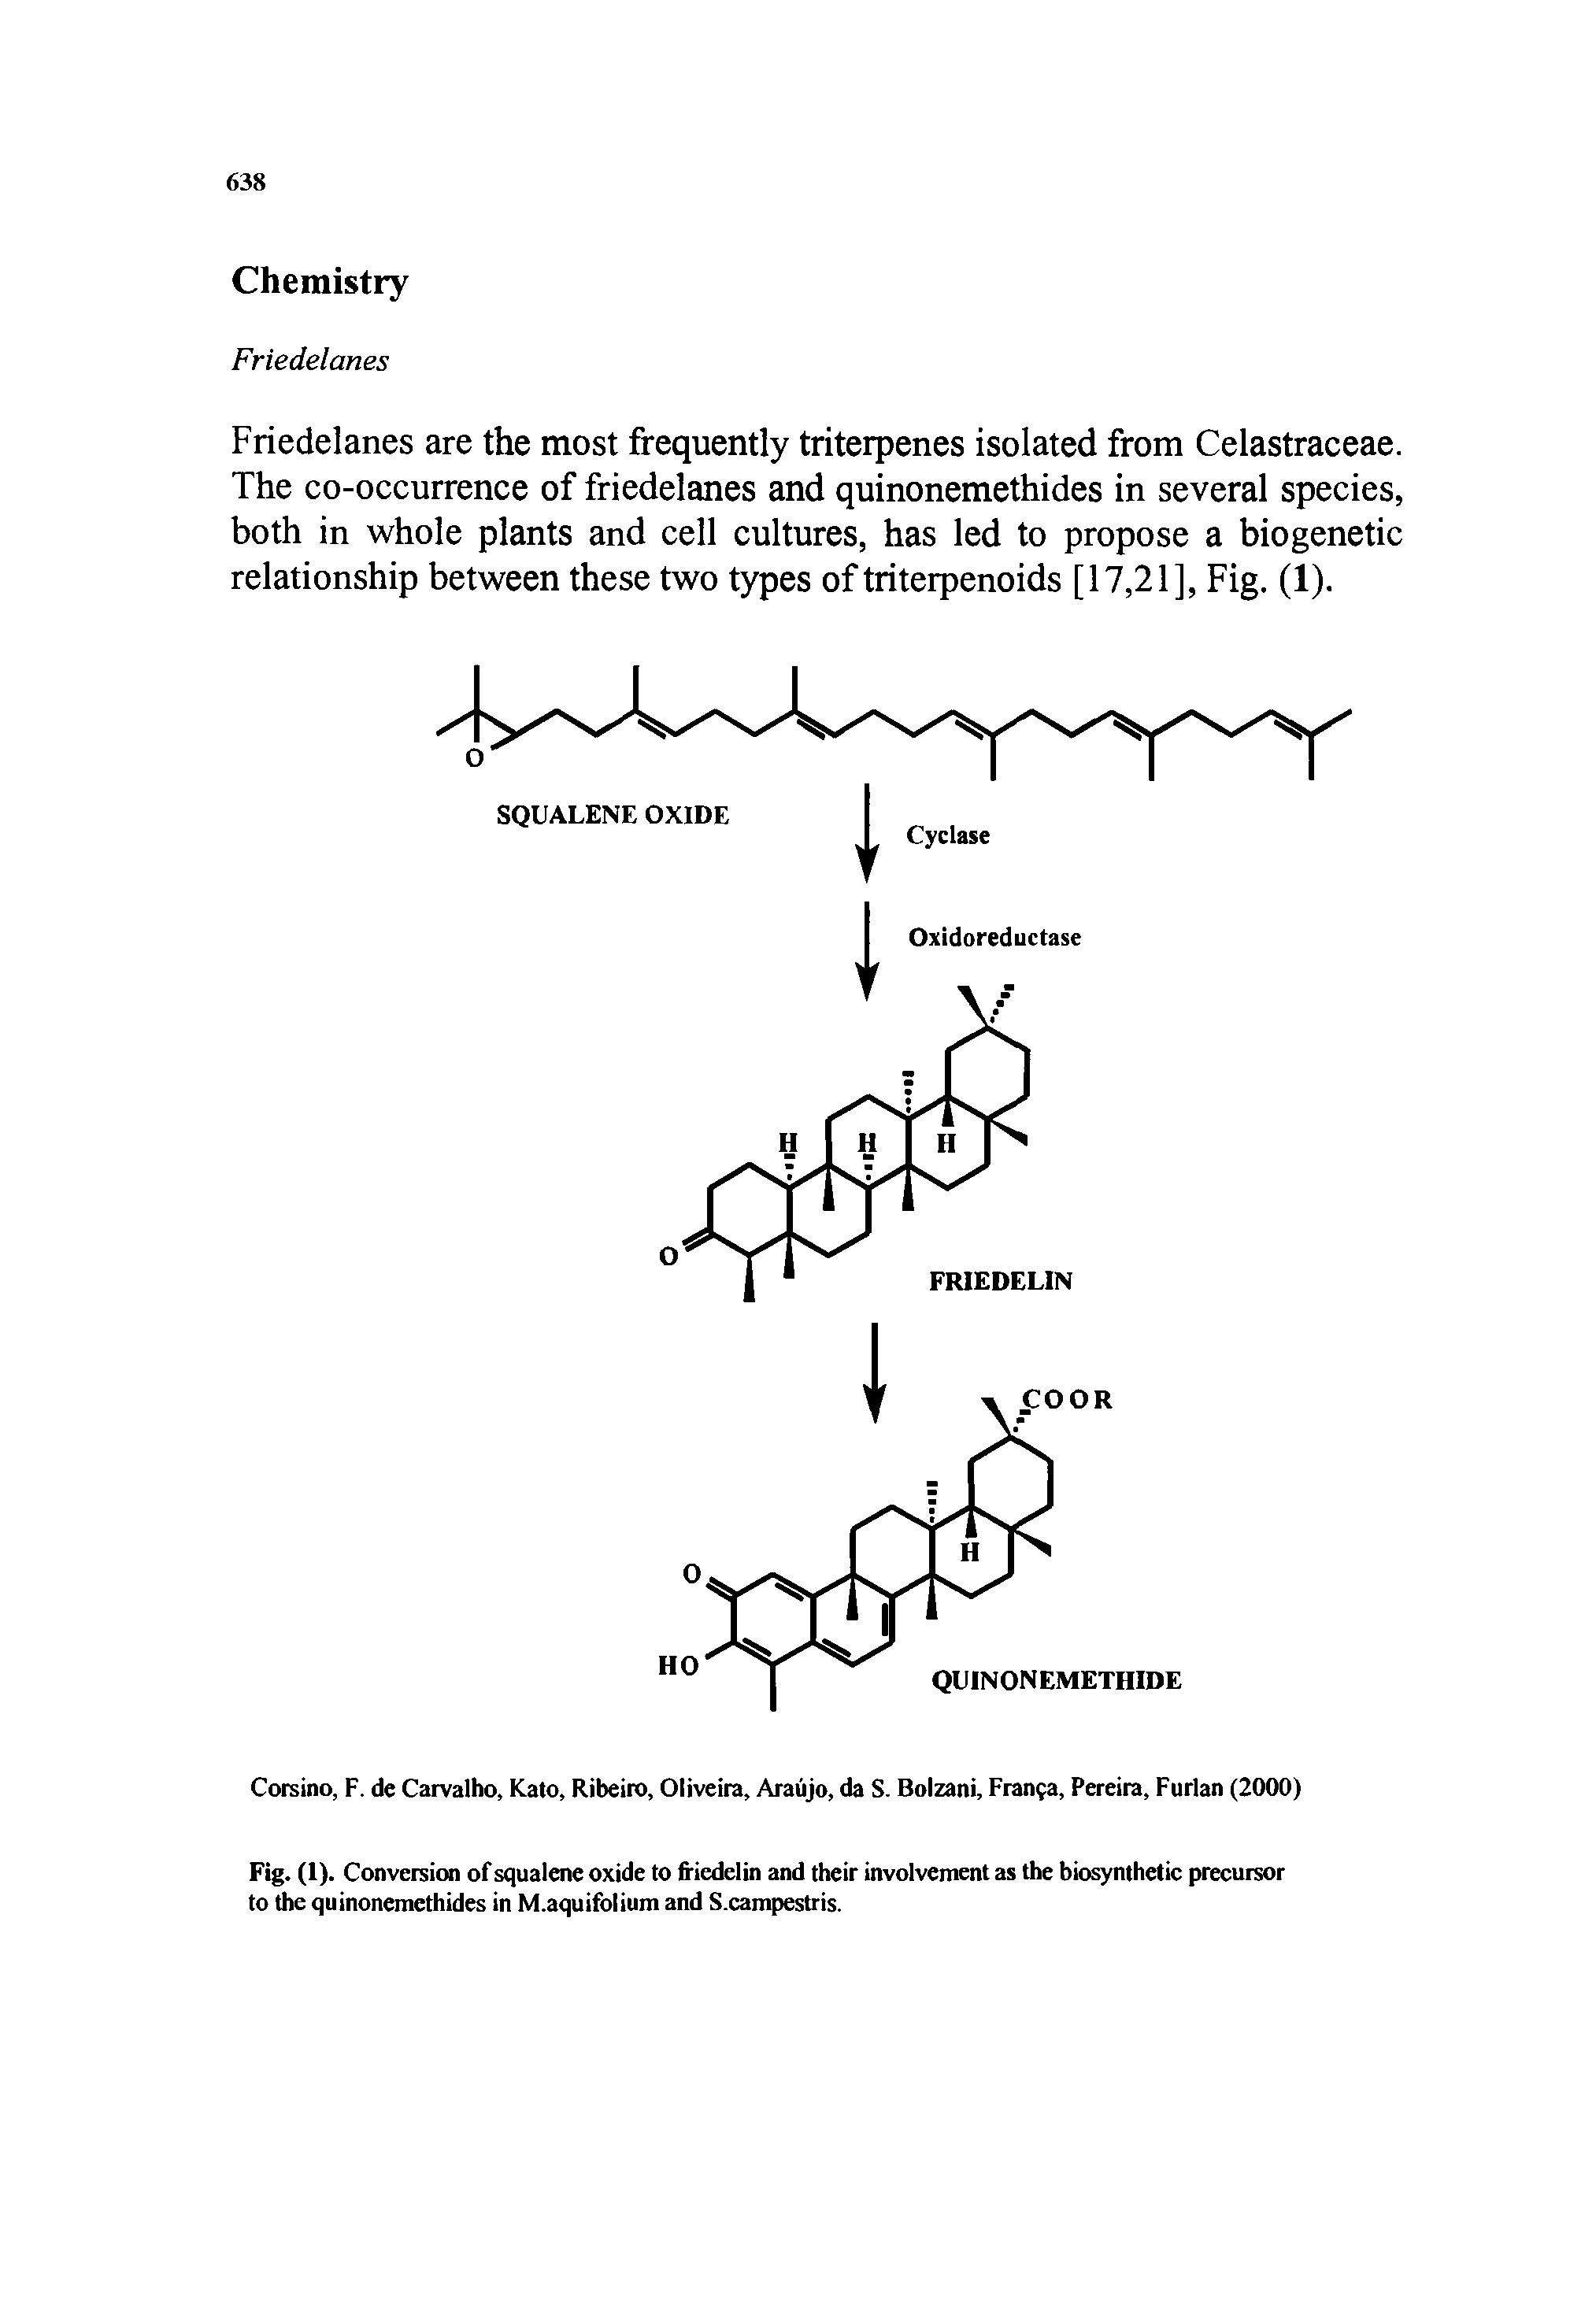 Fig. (1). Conversion of squalene oxide to friedelin and their involvement as the biosynthetic precursor to the quinonemethides in M.aquifolium and S.campestris.